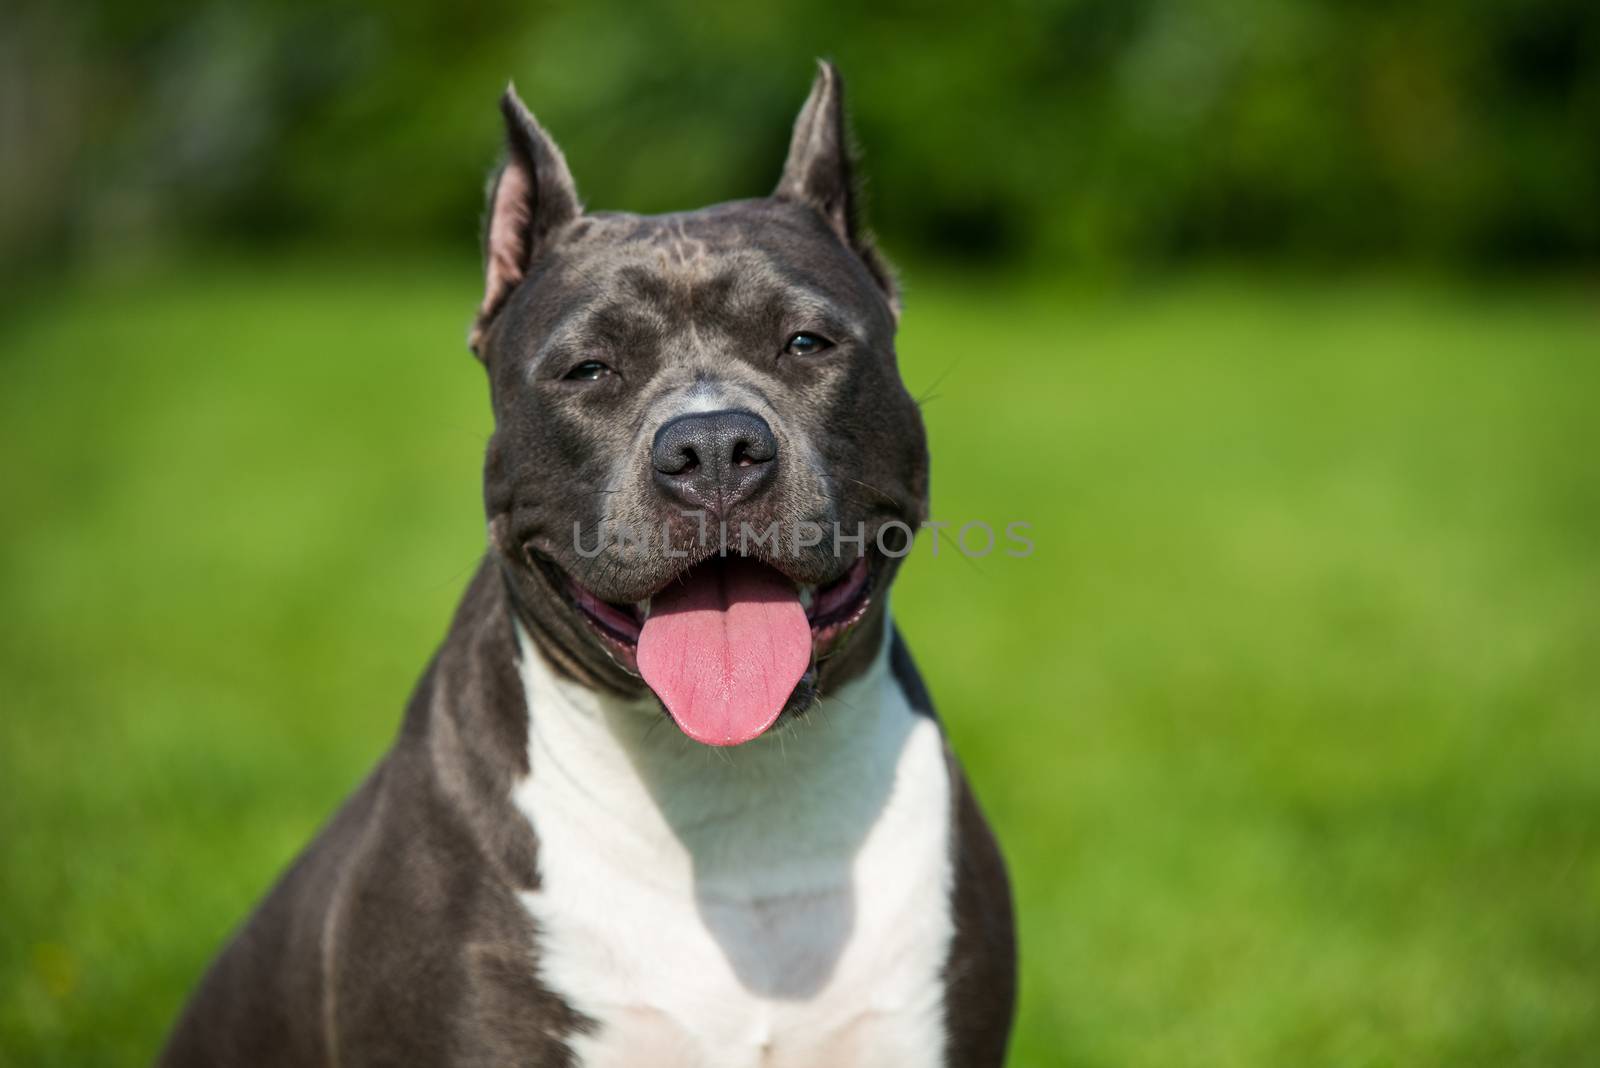 Female blue brindle American Staffordshire Terrier dog or AmStaff closeup on nature